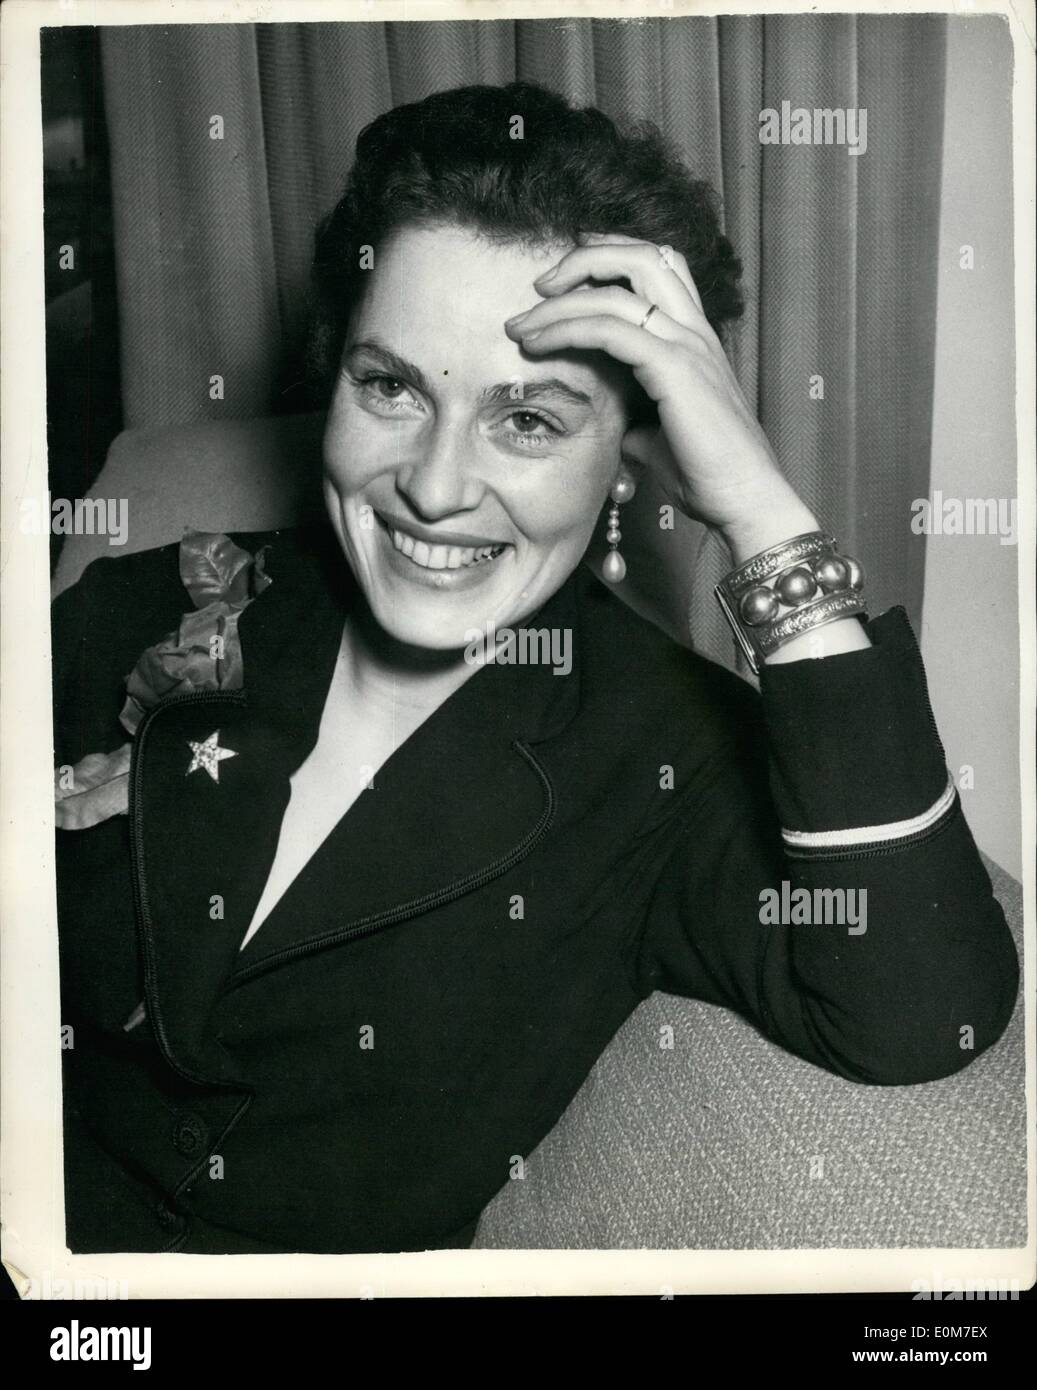 Jan. 01, 1954 - The ''New carbo'' arrives in London. Swedish-born Hollywood star, Viveca Lindfors, aged 33, Known as ''The new Garbo'', arrived in London today from America, to star in ''The white countess'' - the new play by J.b. Priestley and his wife, Jacquetta hawkes. Anthony Vivian is presenting the world premiere of the play at the gaiety theater, Dublin, on February 15. After visiting Bradford, oxford and Birmingham, ''The white countess'' will open in the west end. photo shows Vivace Landforms seen at the savoy this afternoon. Stock Photo